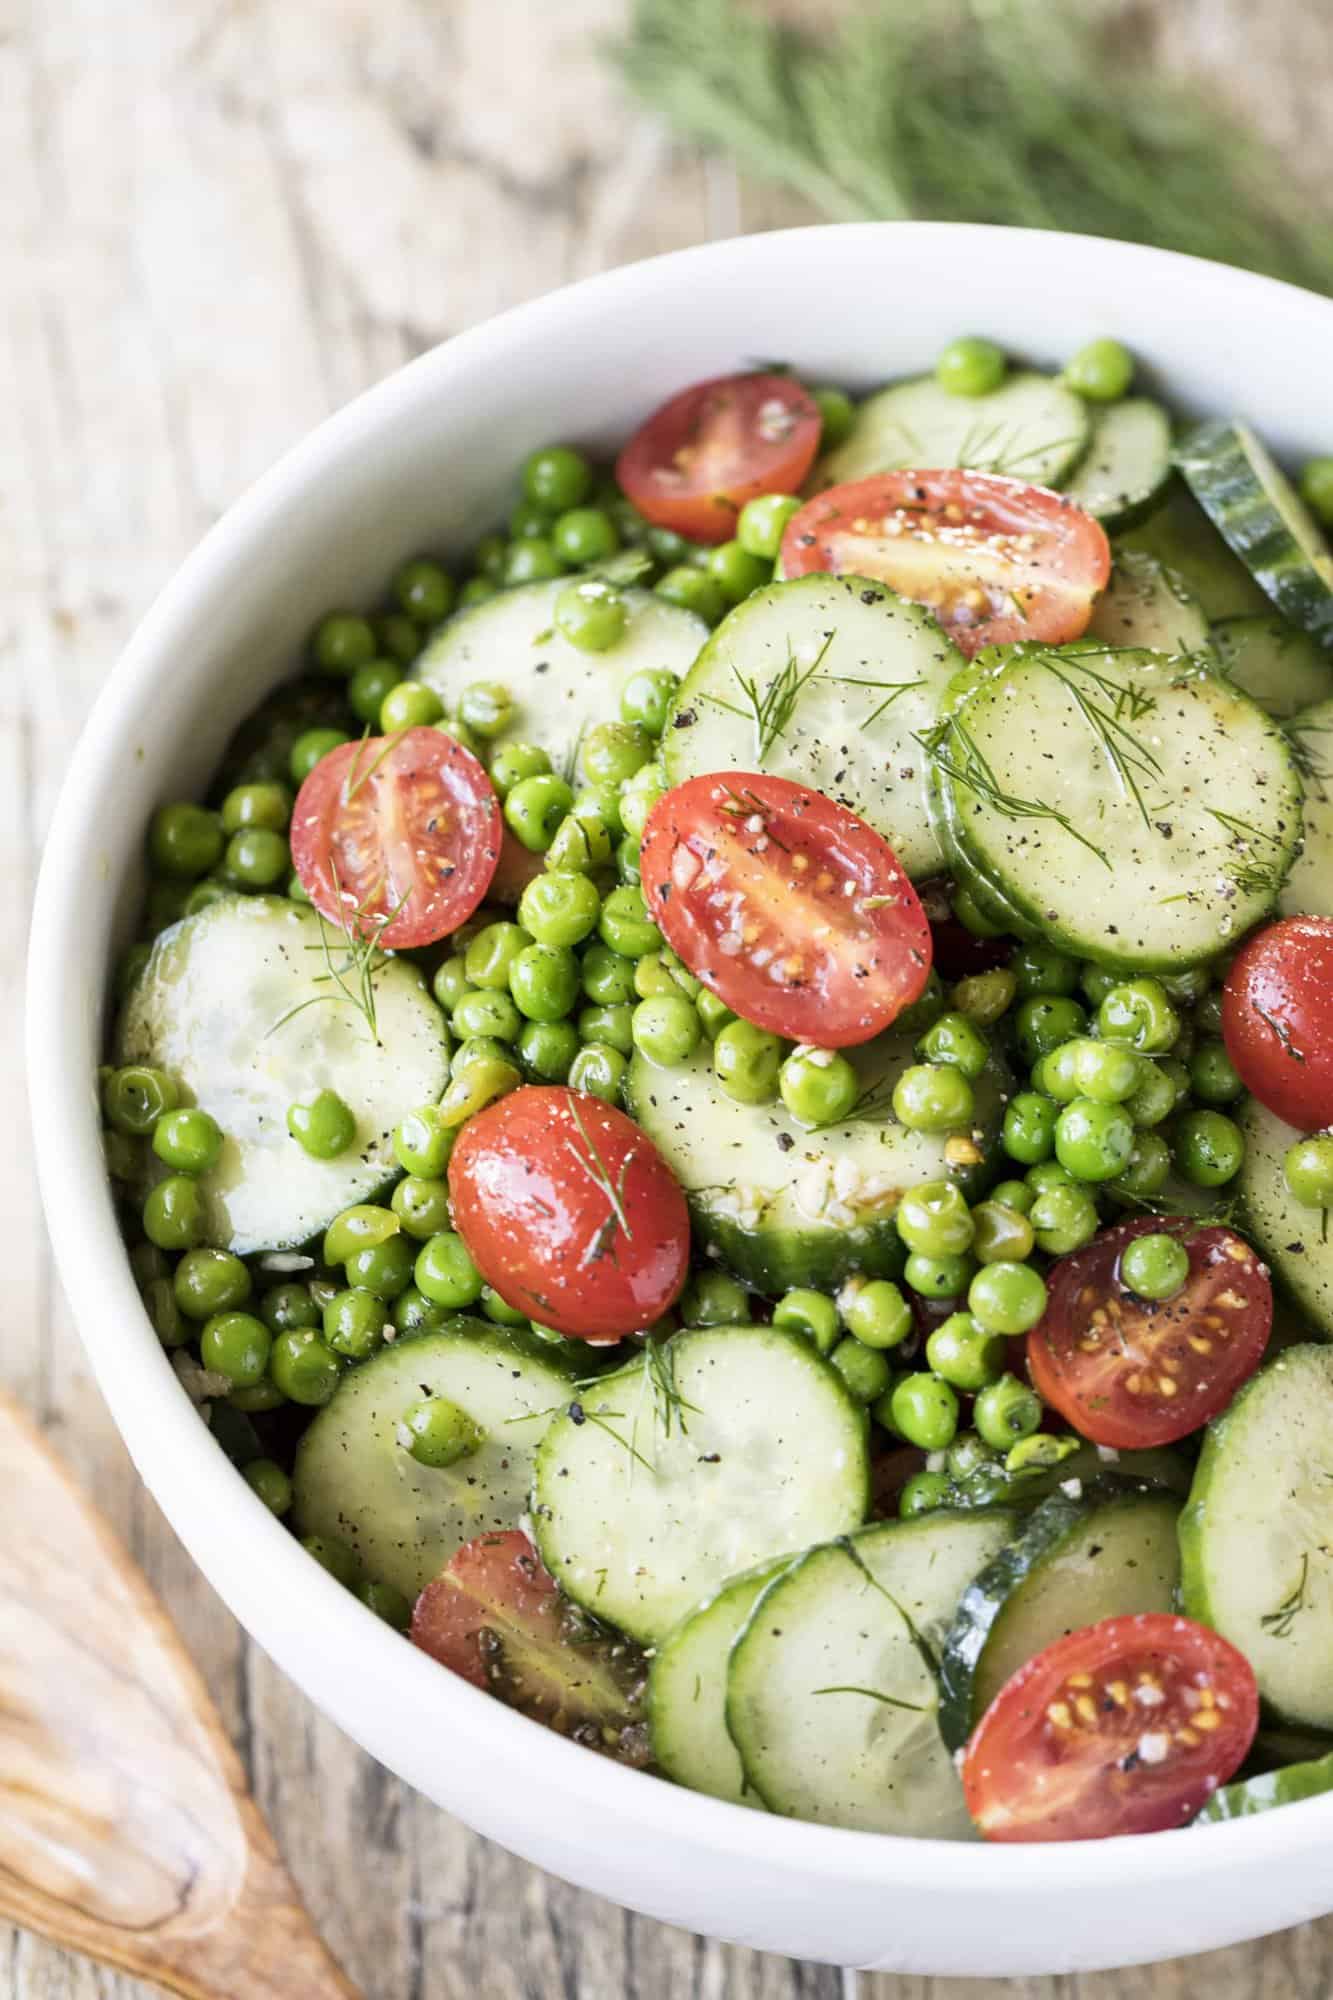 This tangy Dill Pea and Cucumber Salad is light, refreshing, and perfect for picnics, potlucks, and weeknight dinners. This is one of those salads you'll make again and again!